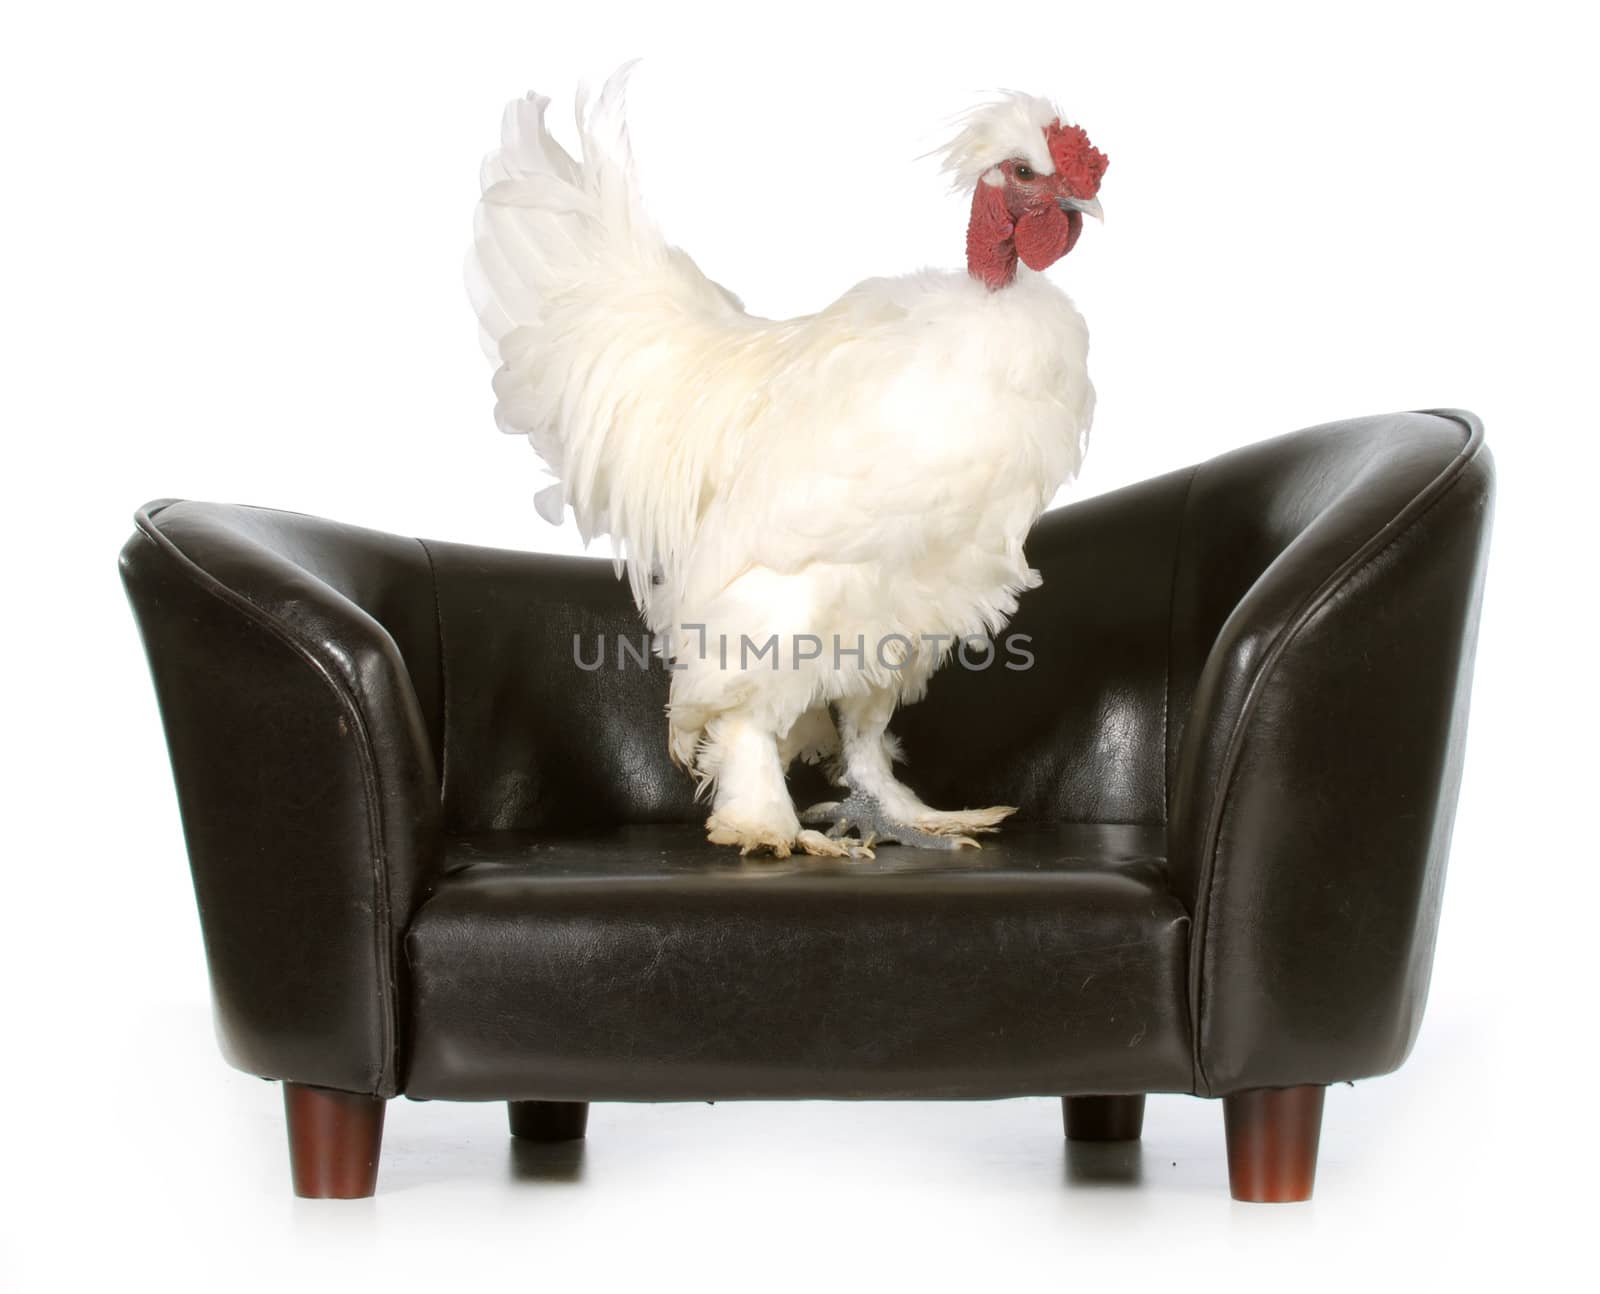 chicken on a couch by willeecole123